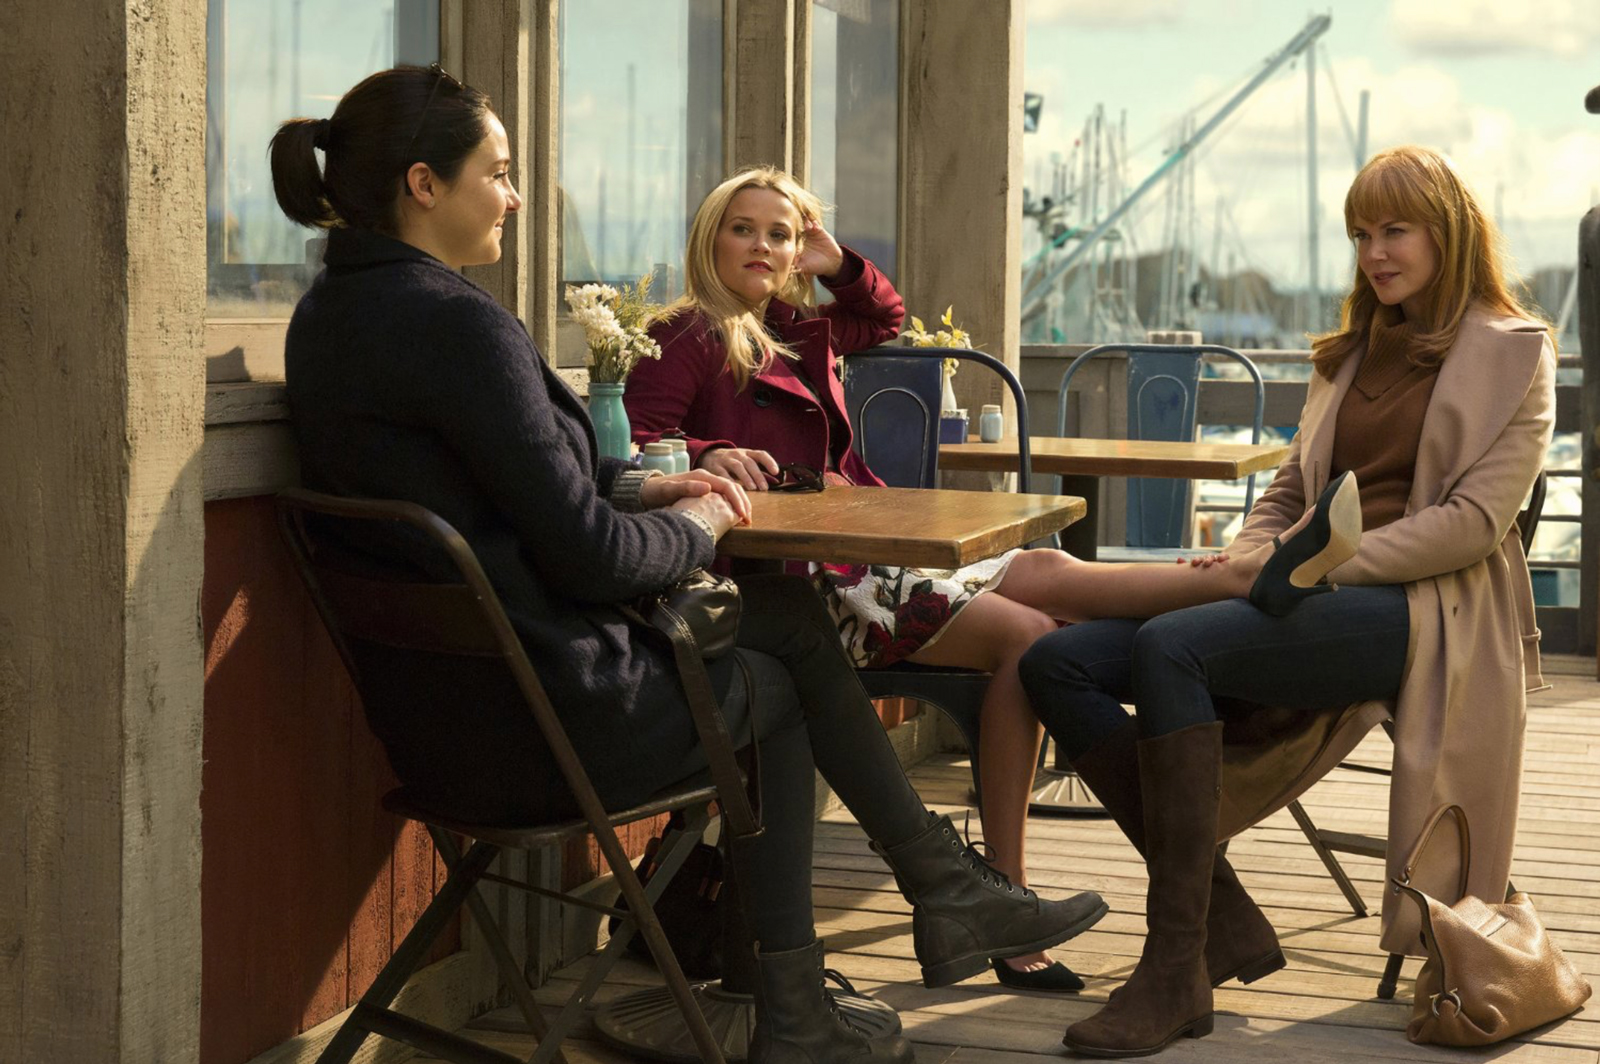 Shailene Woodley as Jane, Reese Witherspoon as Madeline, and Nicole Kidman as Celeste, in Jean-Marc Vallée's Big Little Lies, 2017